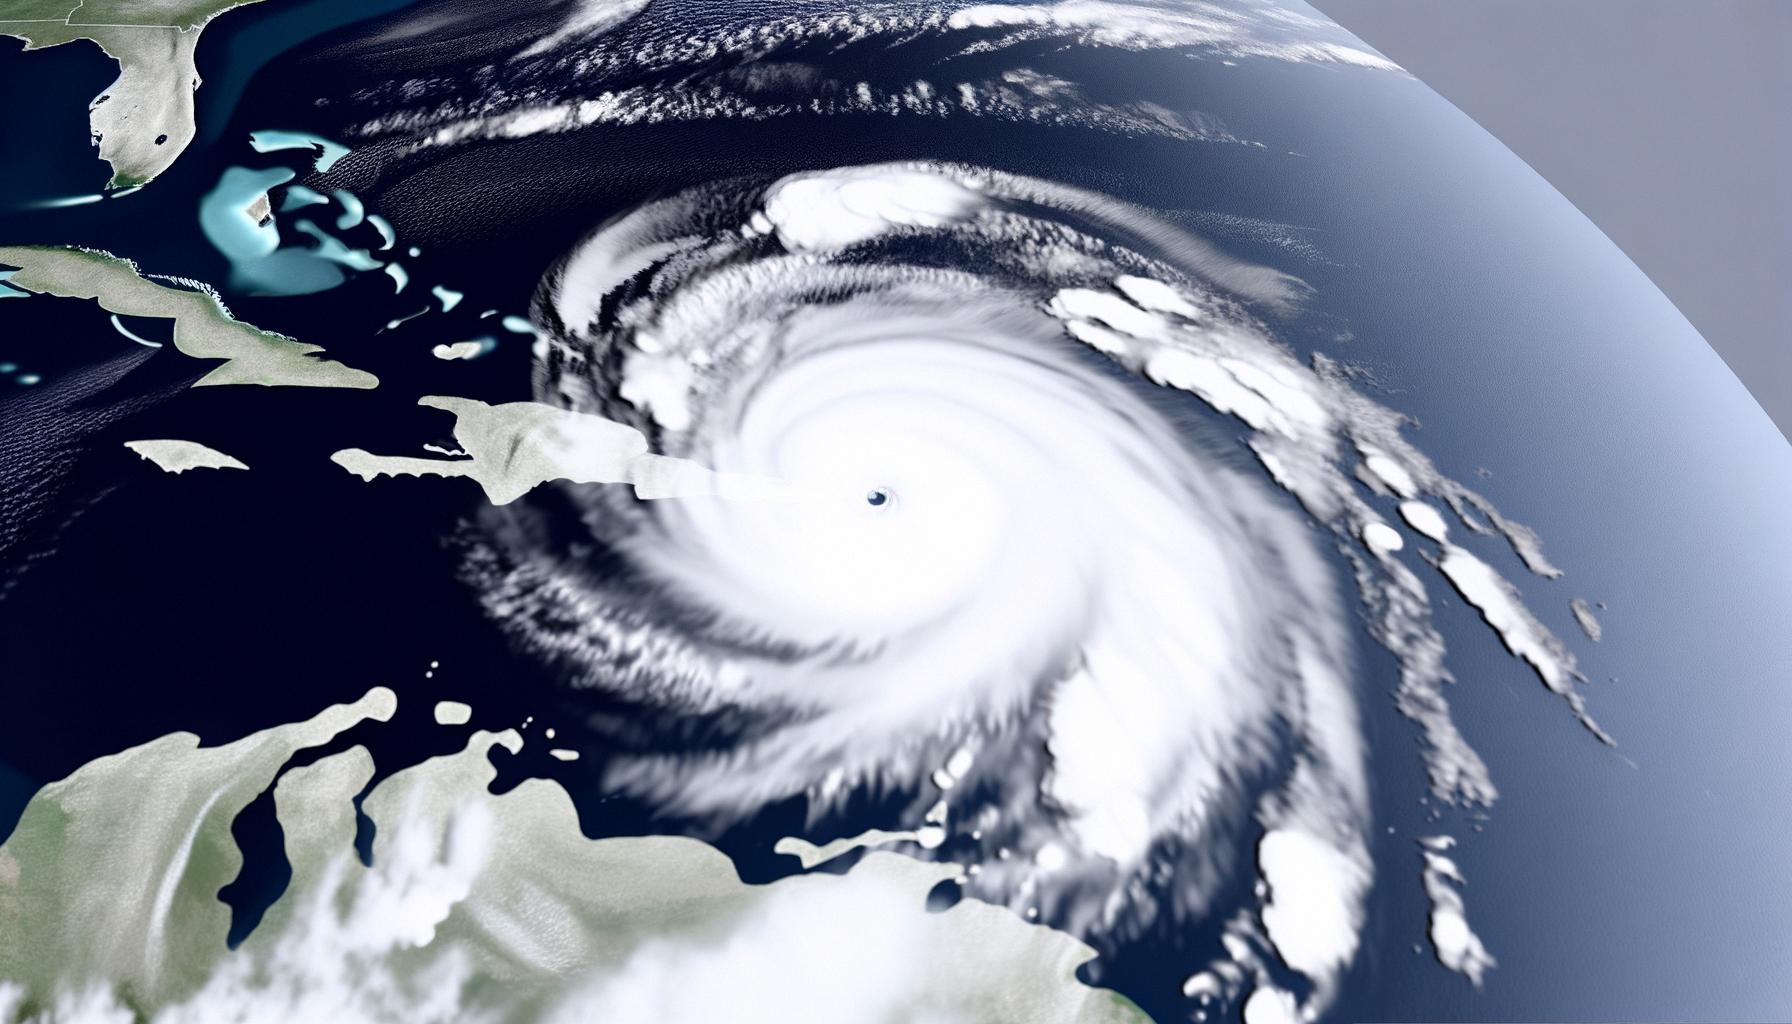 Hurricane Beryl projected to hit Caribbean as Category 4 hurricane